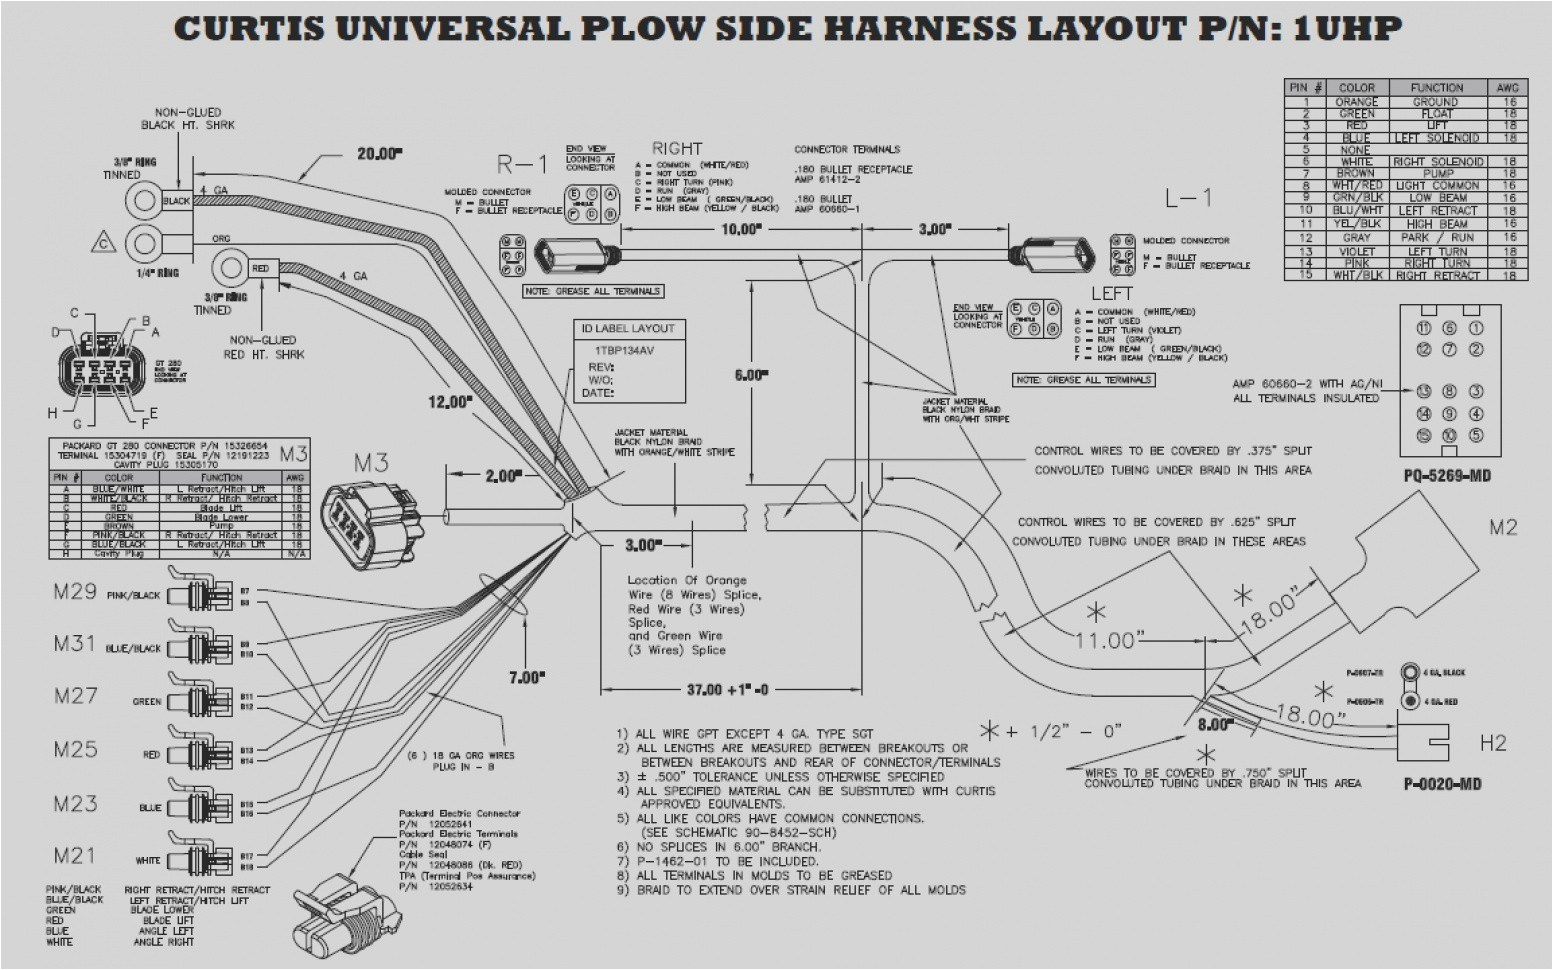 curtis snow plow wiring diagram awesome straight blade snowdogg plow wiring diagram of curtis snow plow wiring diagram jpg